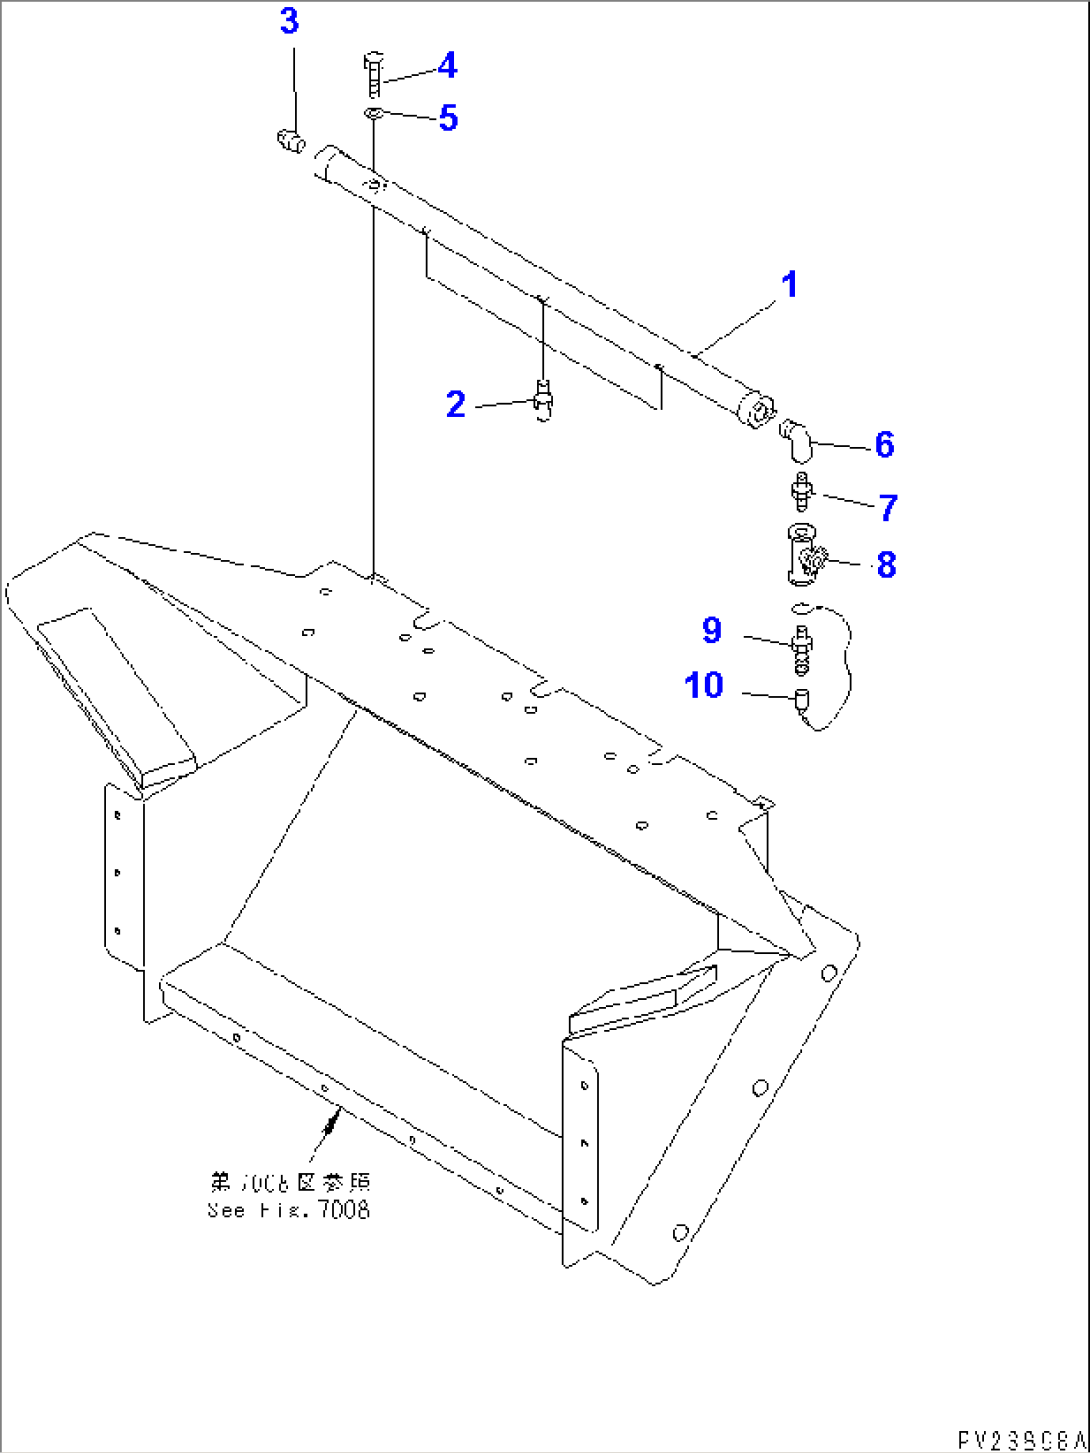 WATER SPRINKLING NOZZLE(#1002-1100)